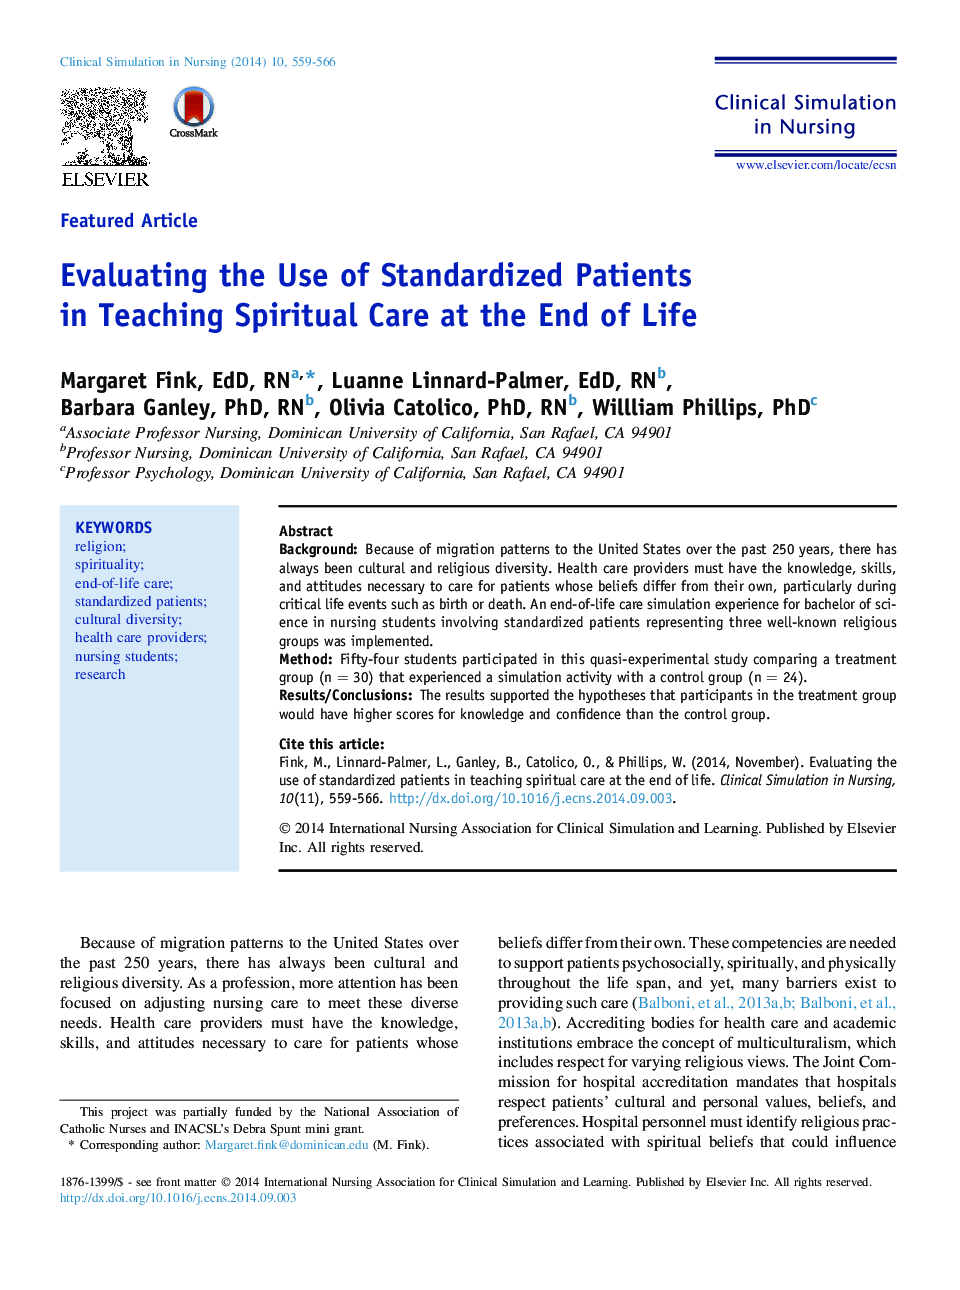 Evaluating the Use of Standardized Patients in Teaching Spiritual Care at the End of Life 